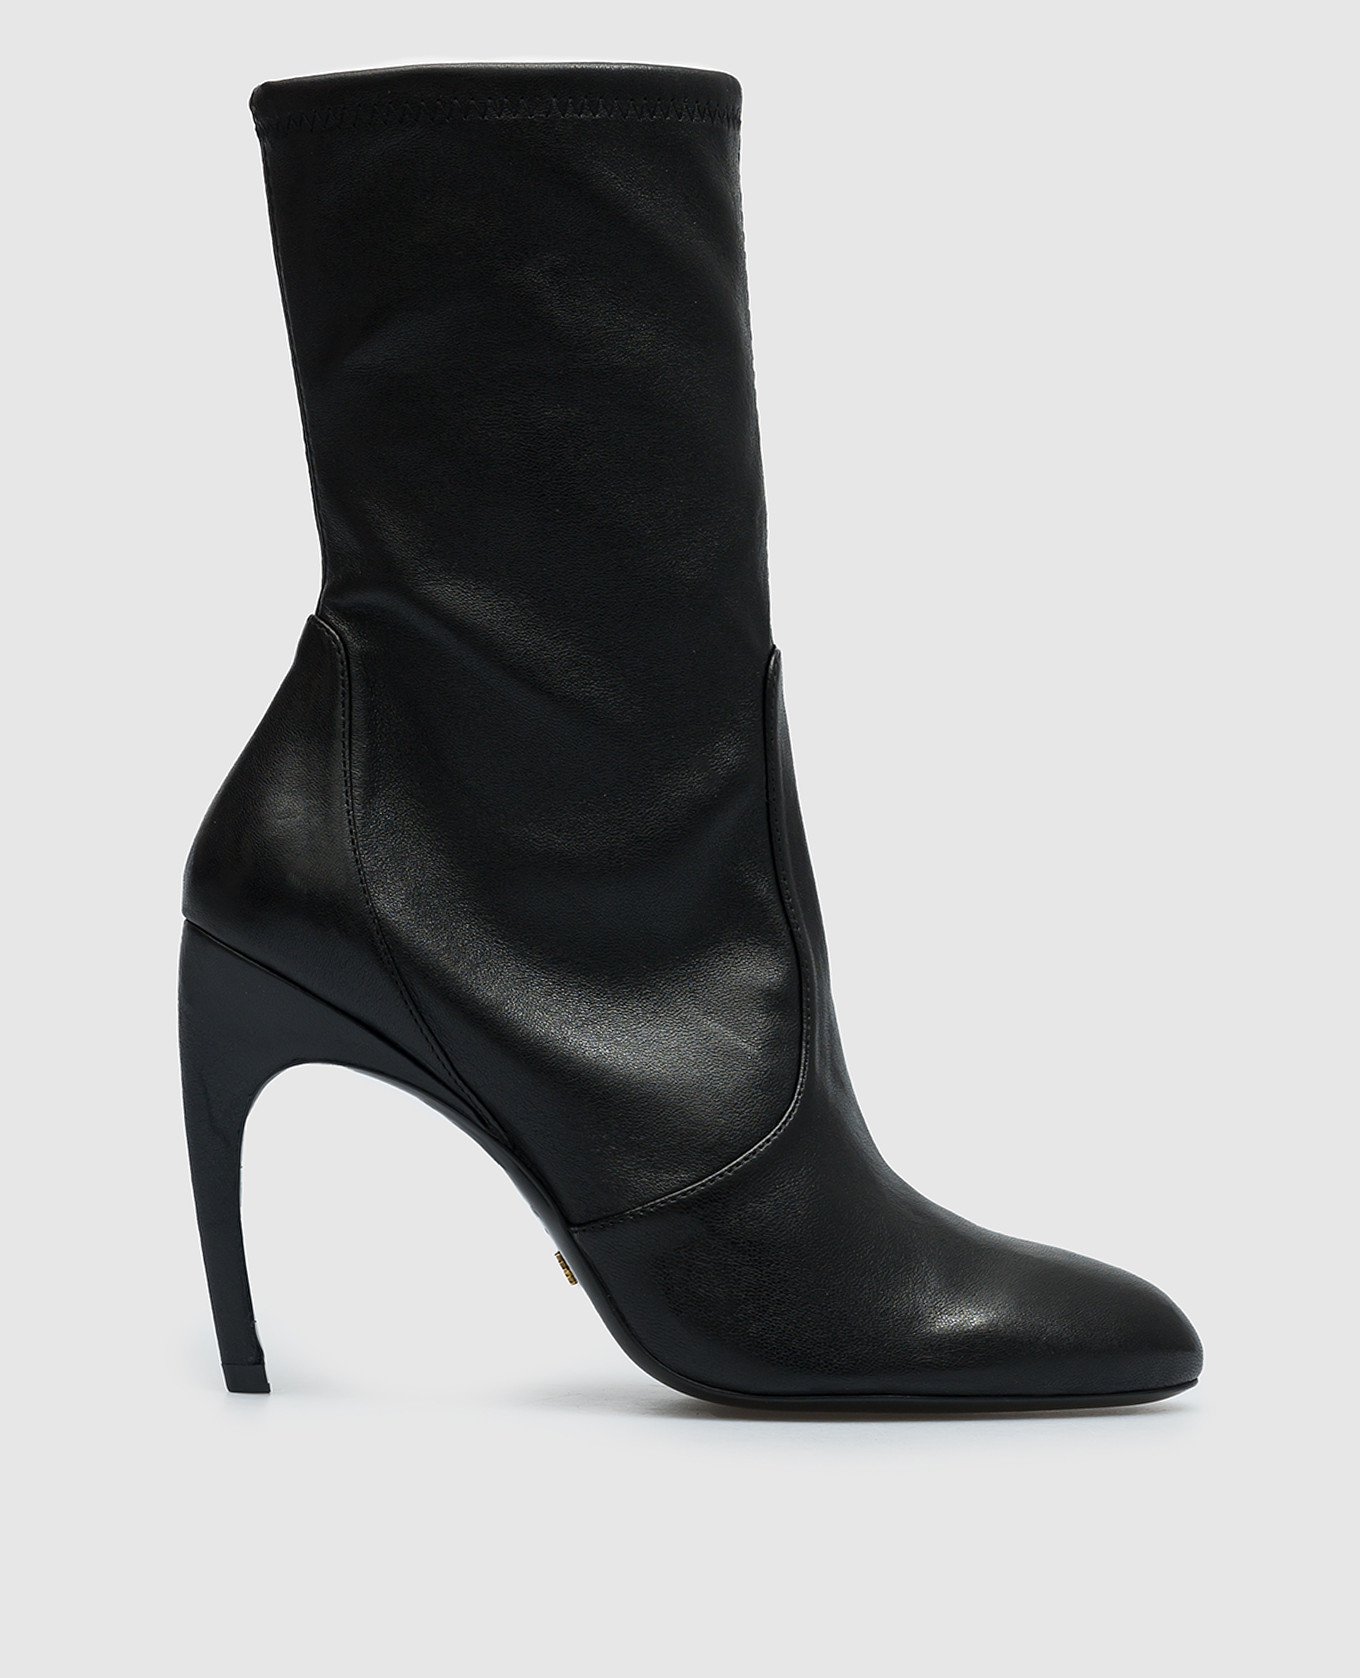 Lxecrve Black Leather Ankle Boots